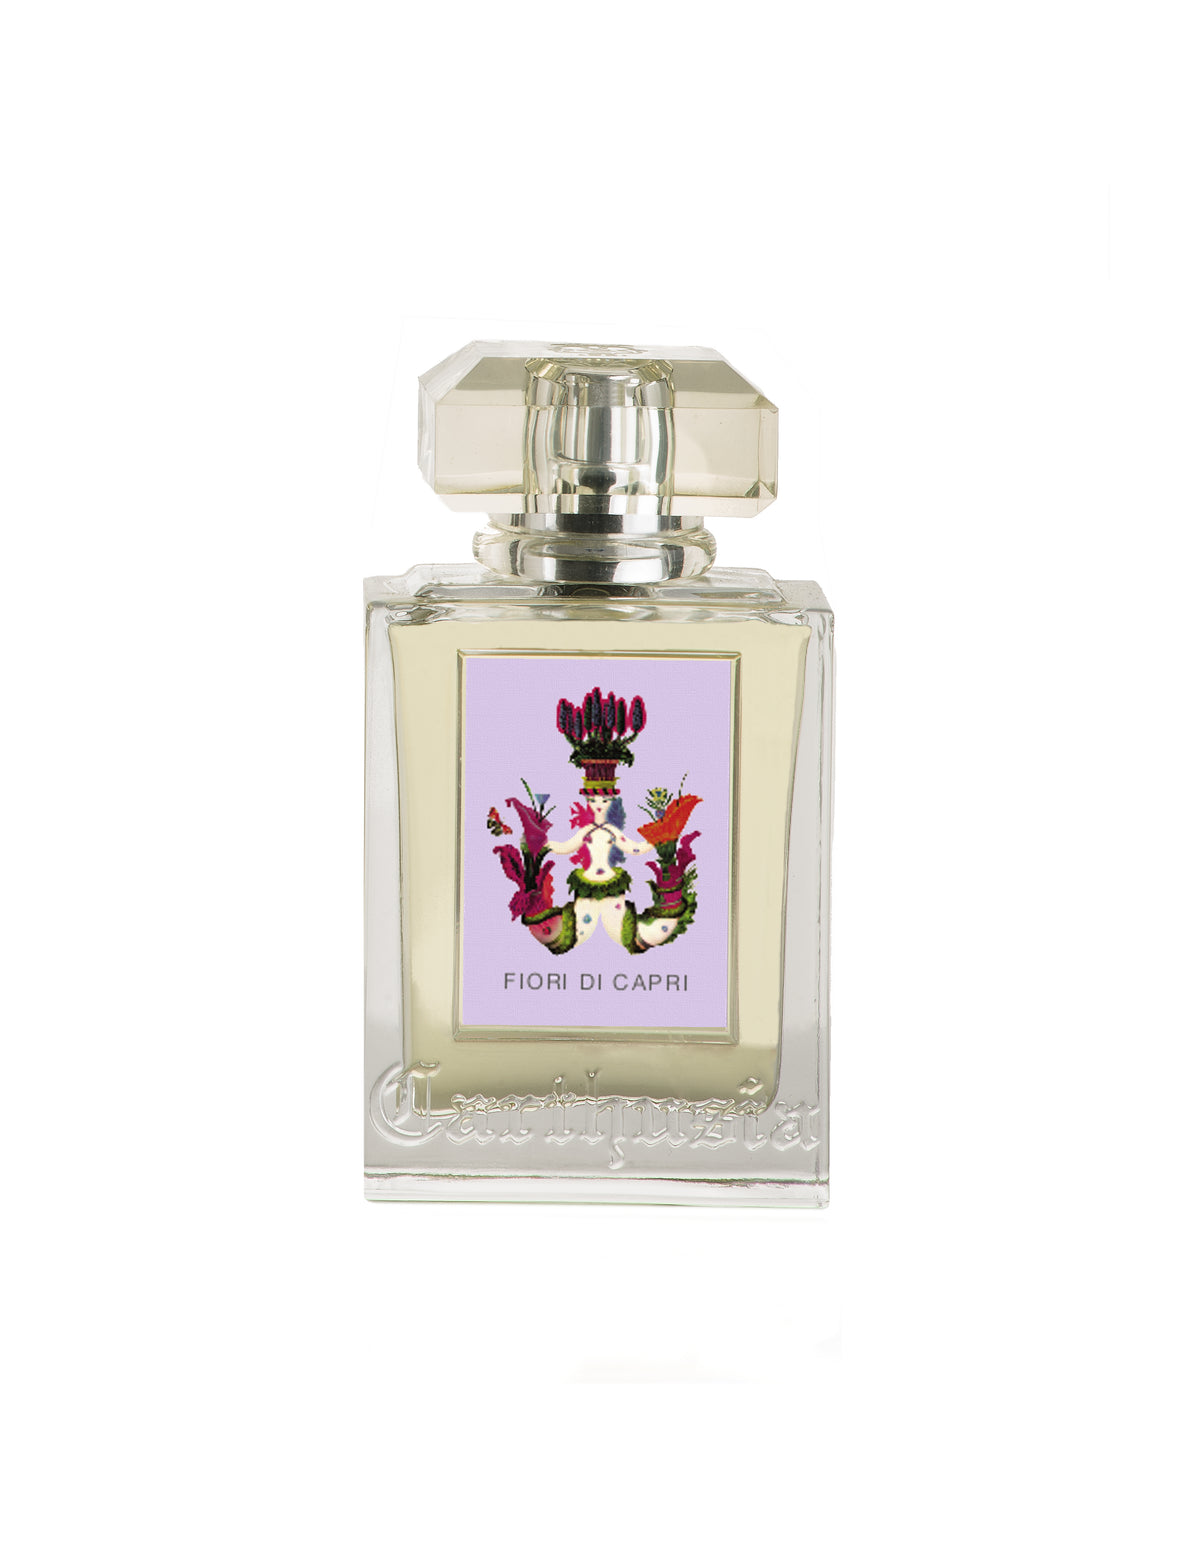 A clear glass perfume bottle with a silver cap and a label that reads "Carthusia Fiori di Capri" featuring colorful floral graphics of wild carnations. The background is plain white.